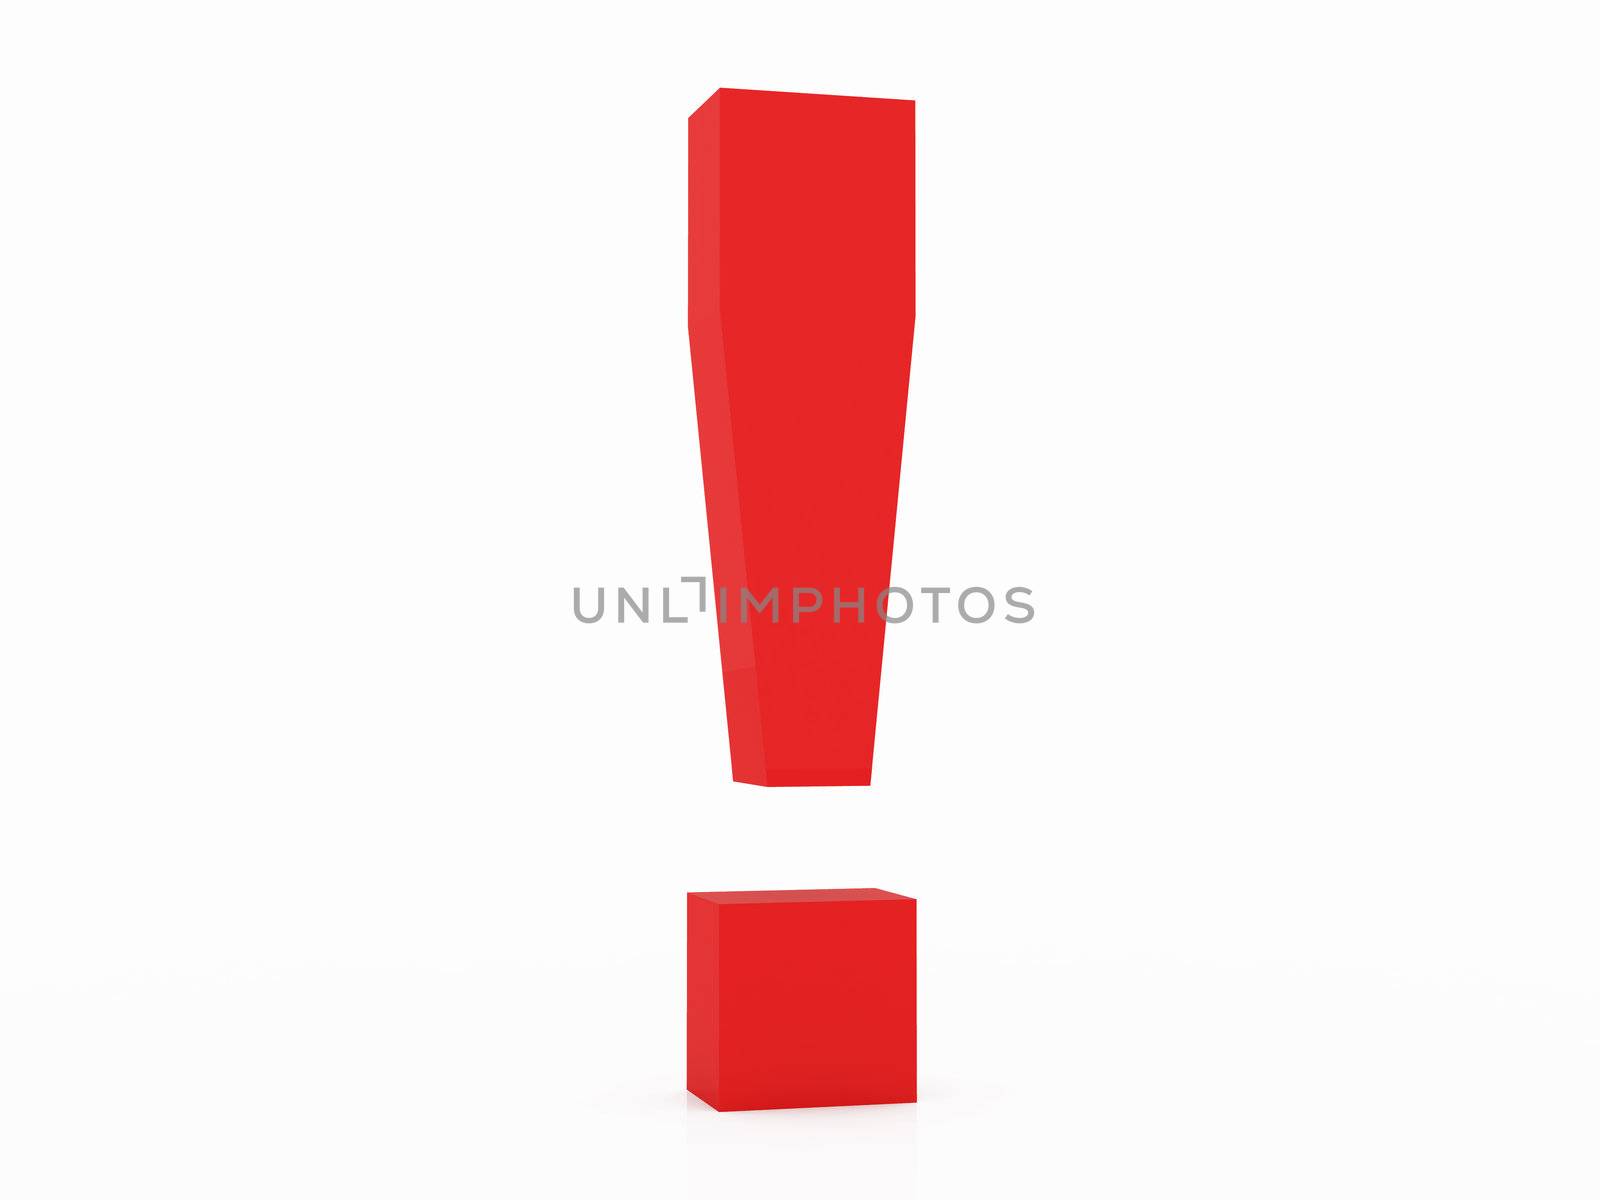 Red, three dimensional shape exclamation mark on white background.